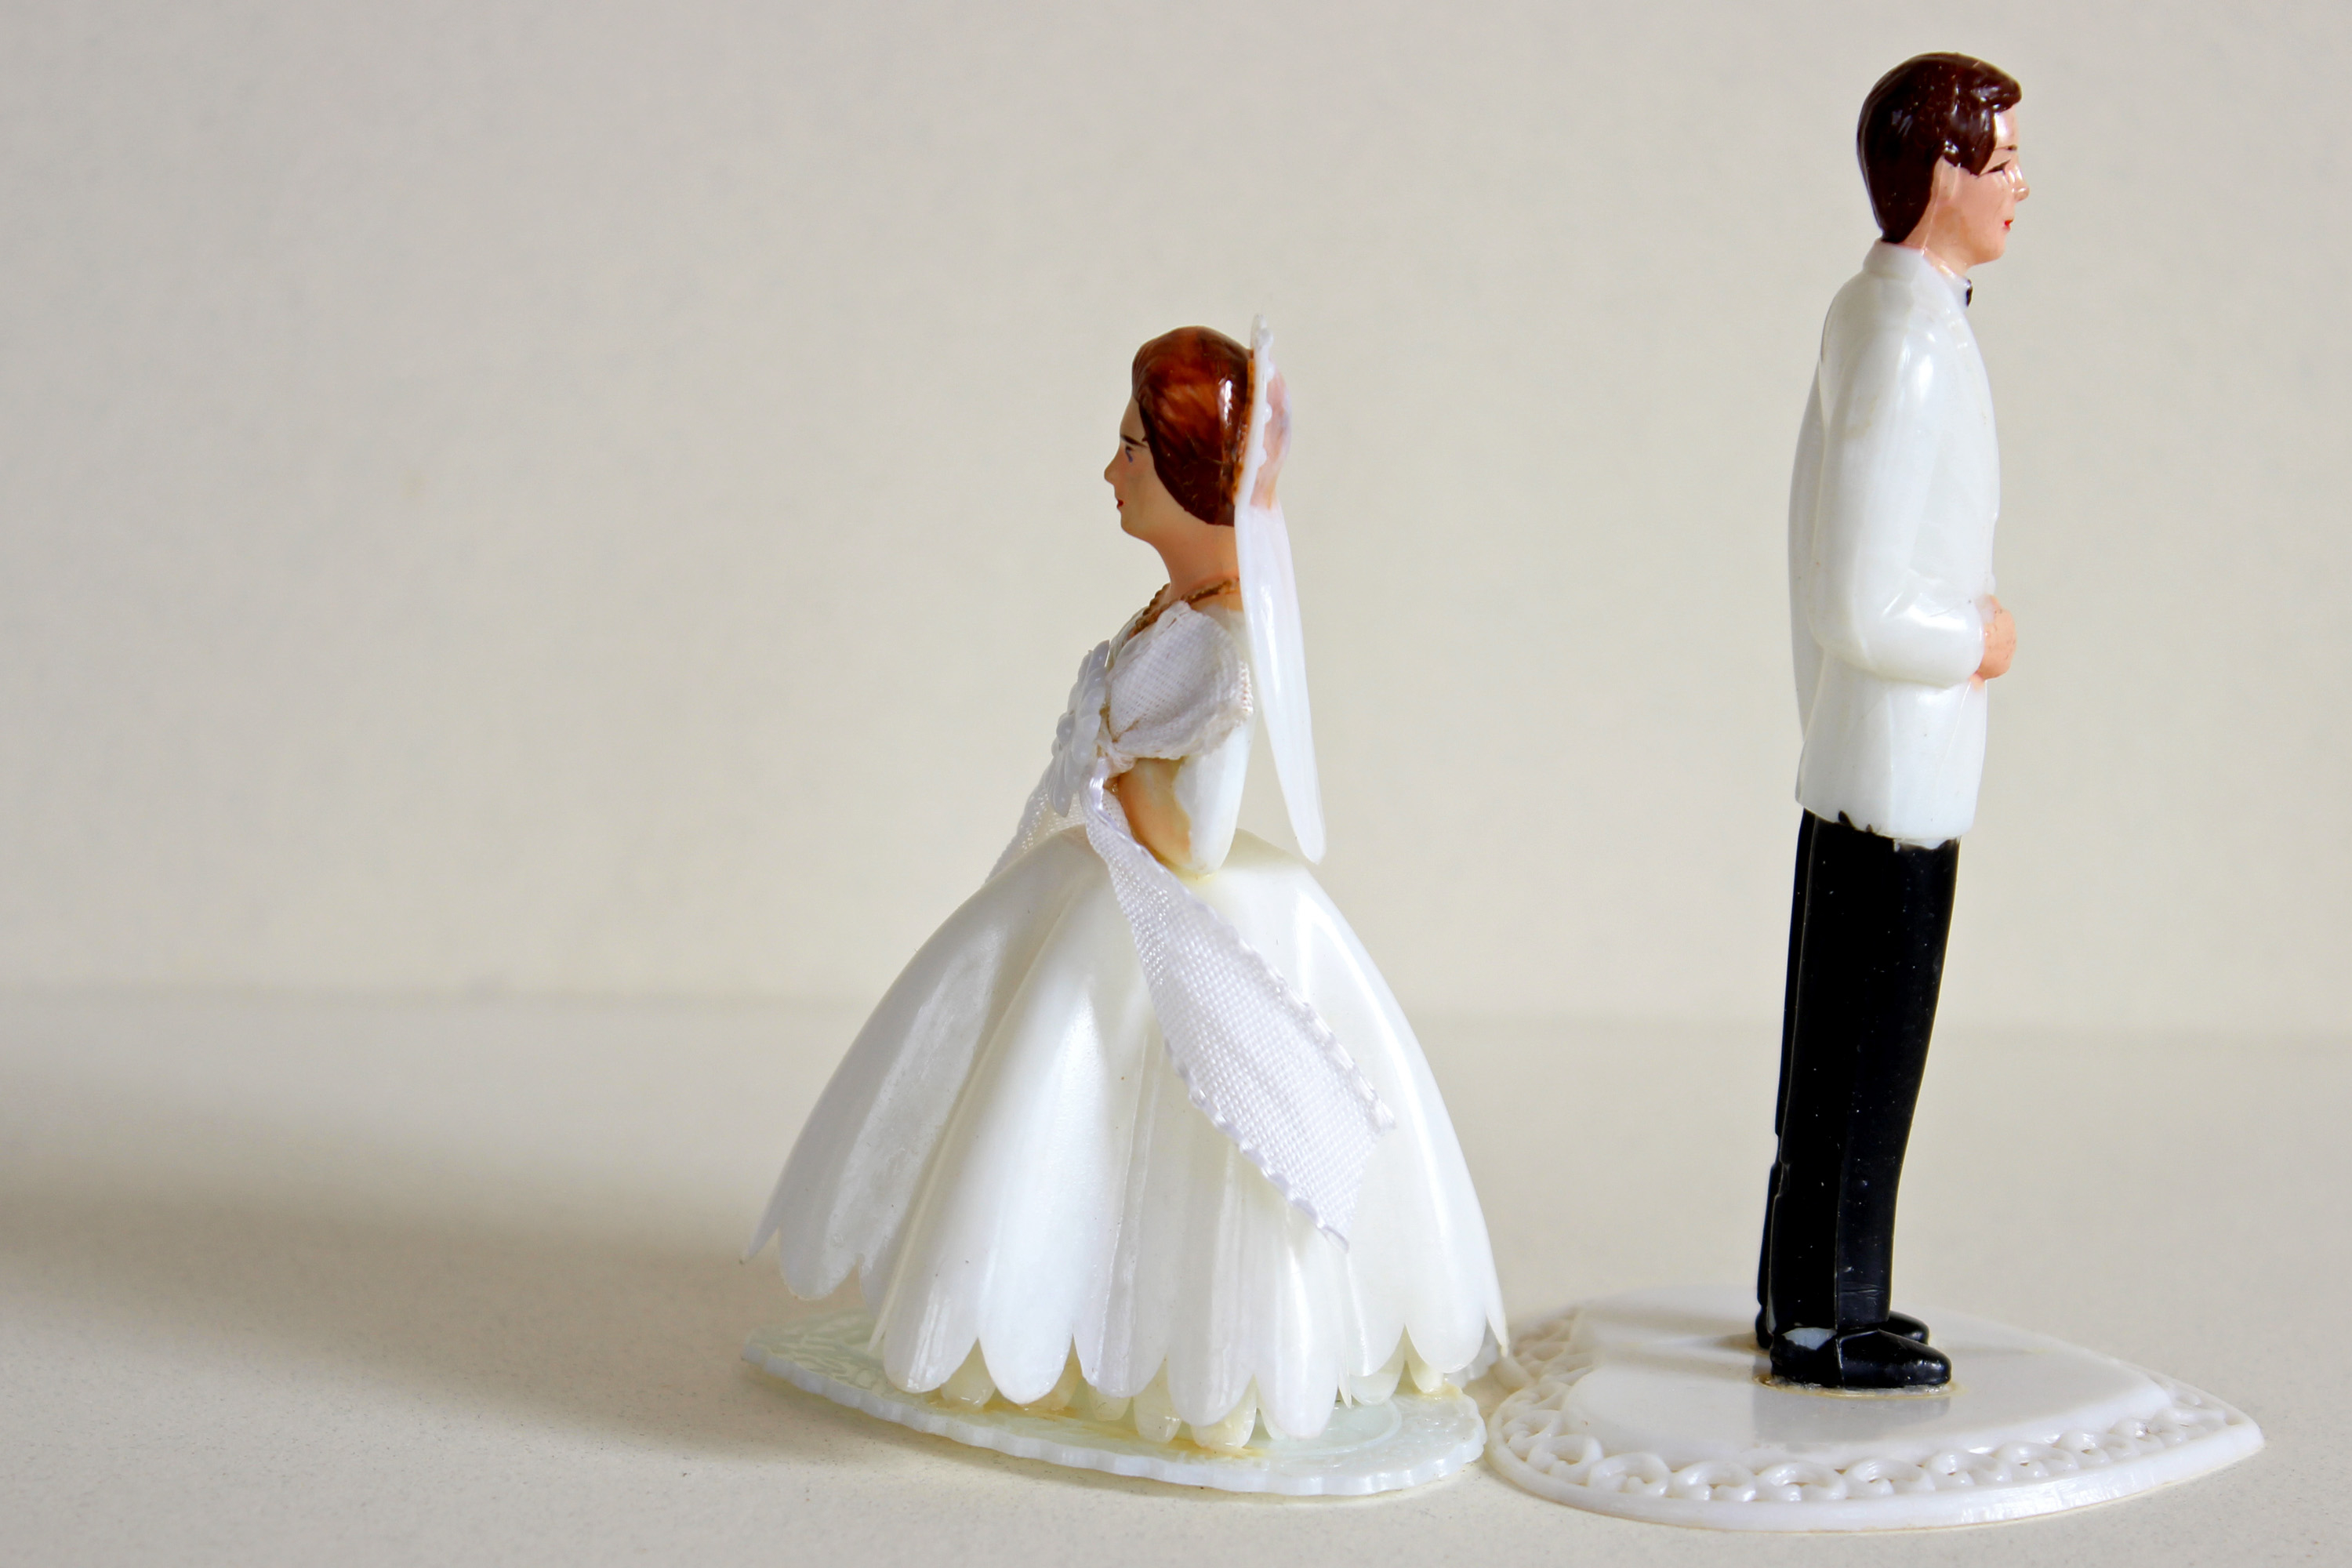 Wedding cake toppers turned away from each other as a sign of divorce.